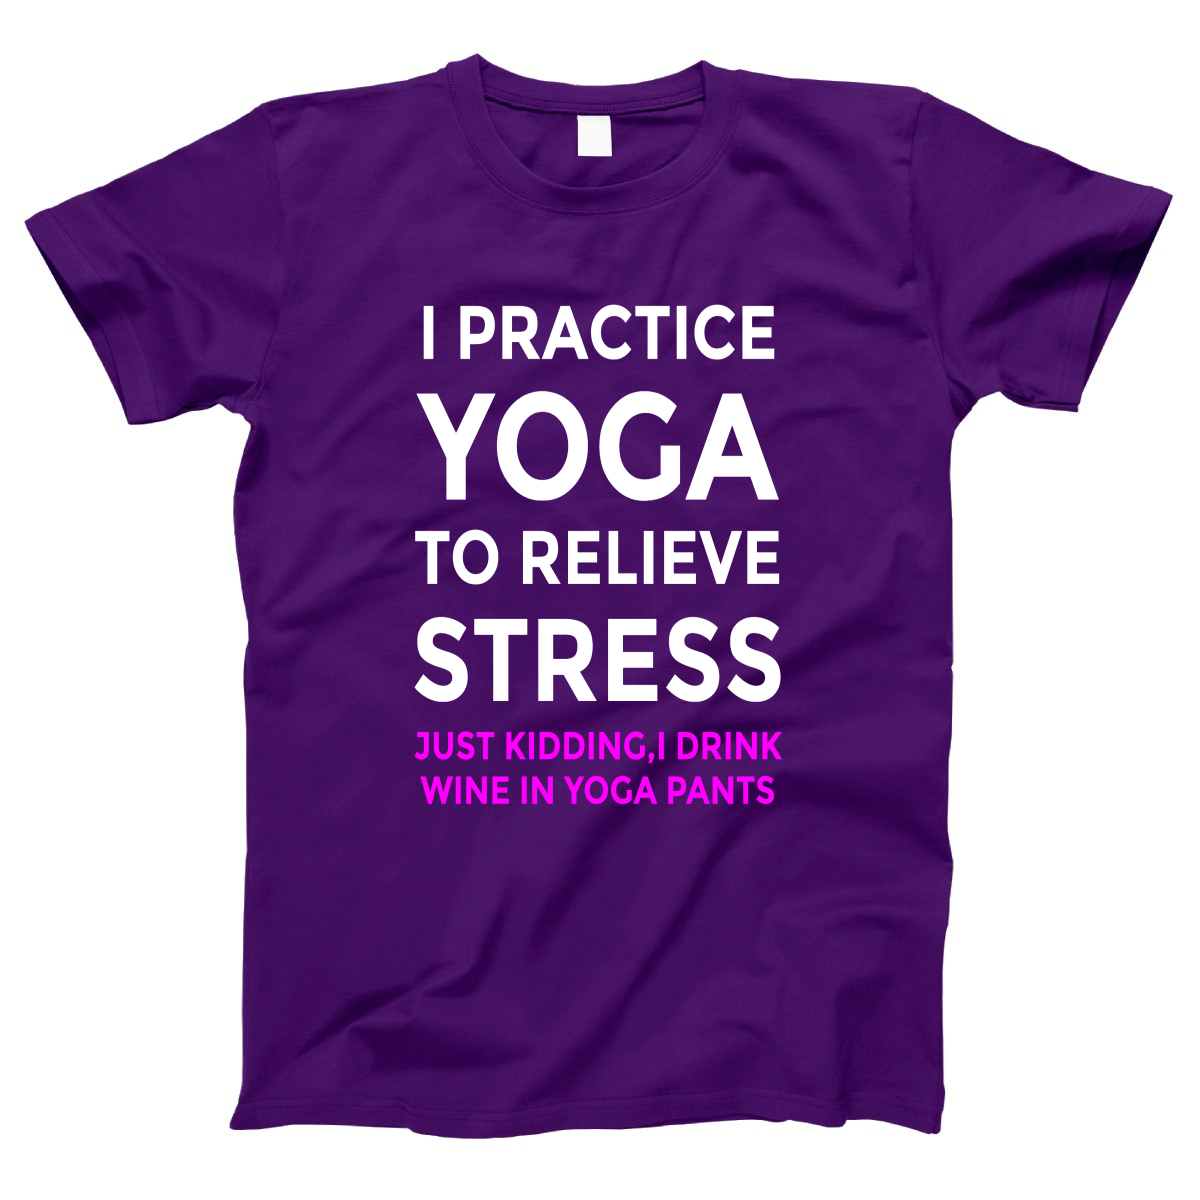 I practice yoga to relieve stress, just kidding I drink wine in yoga pants Women's T-shirt | Purple